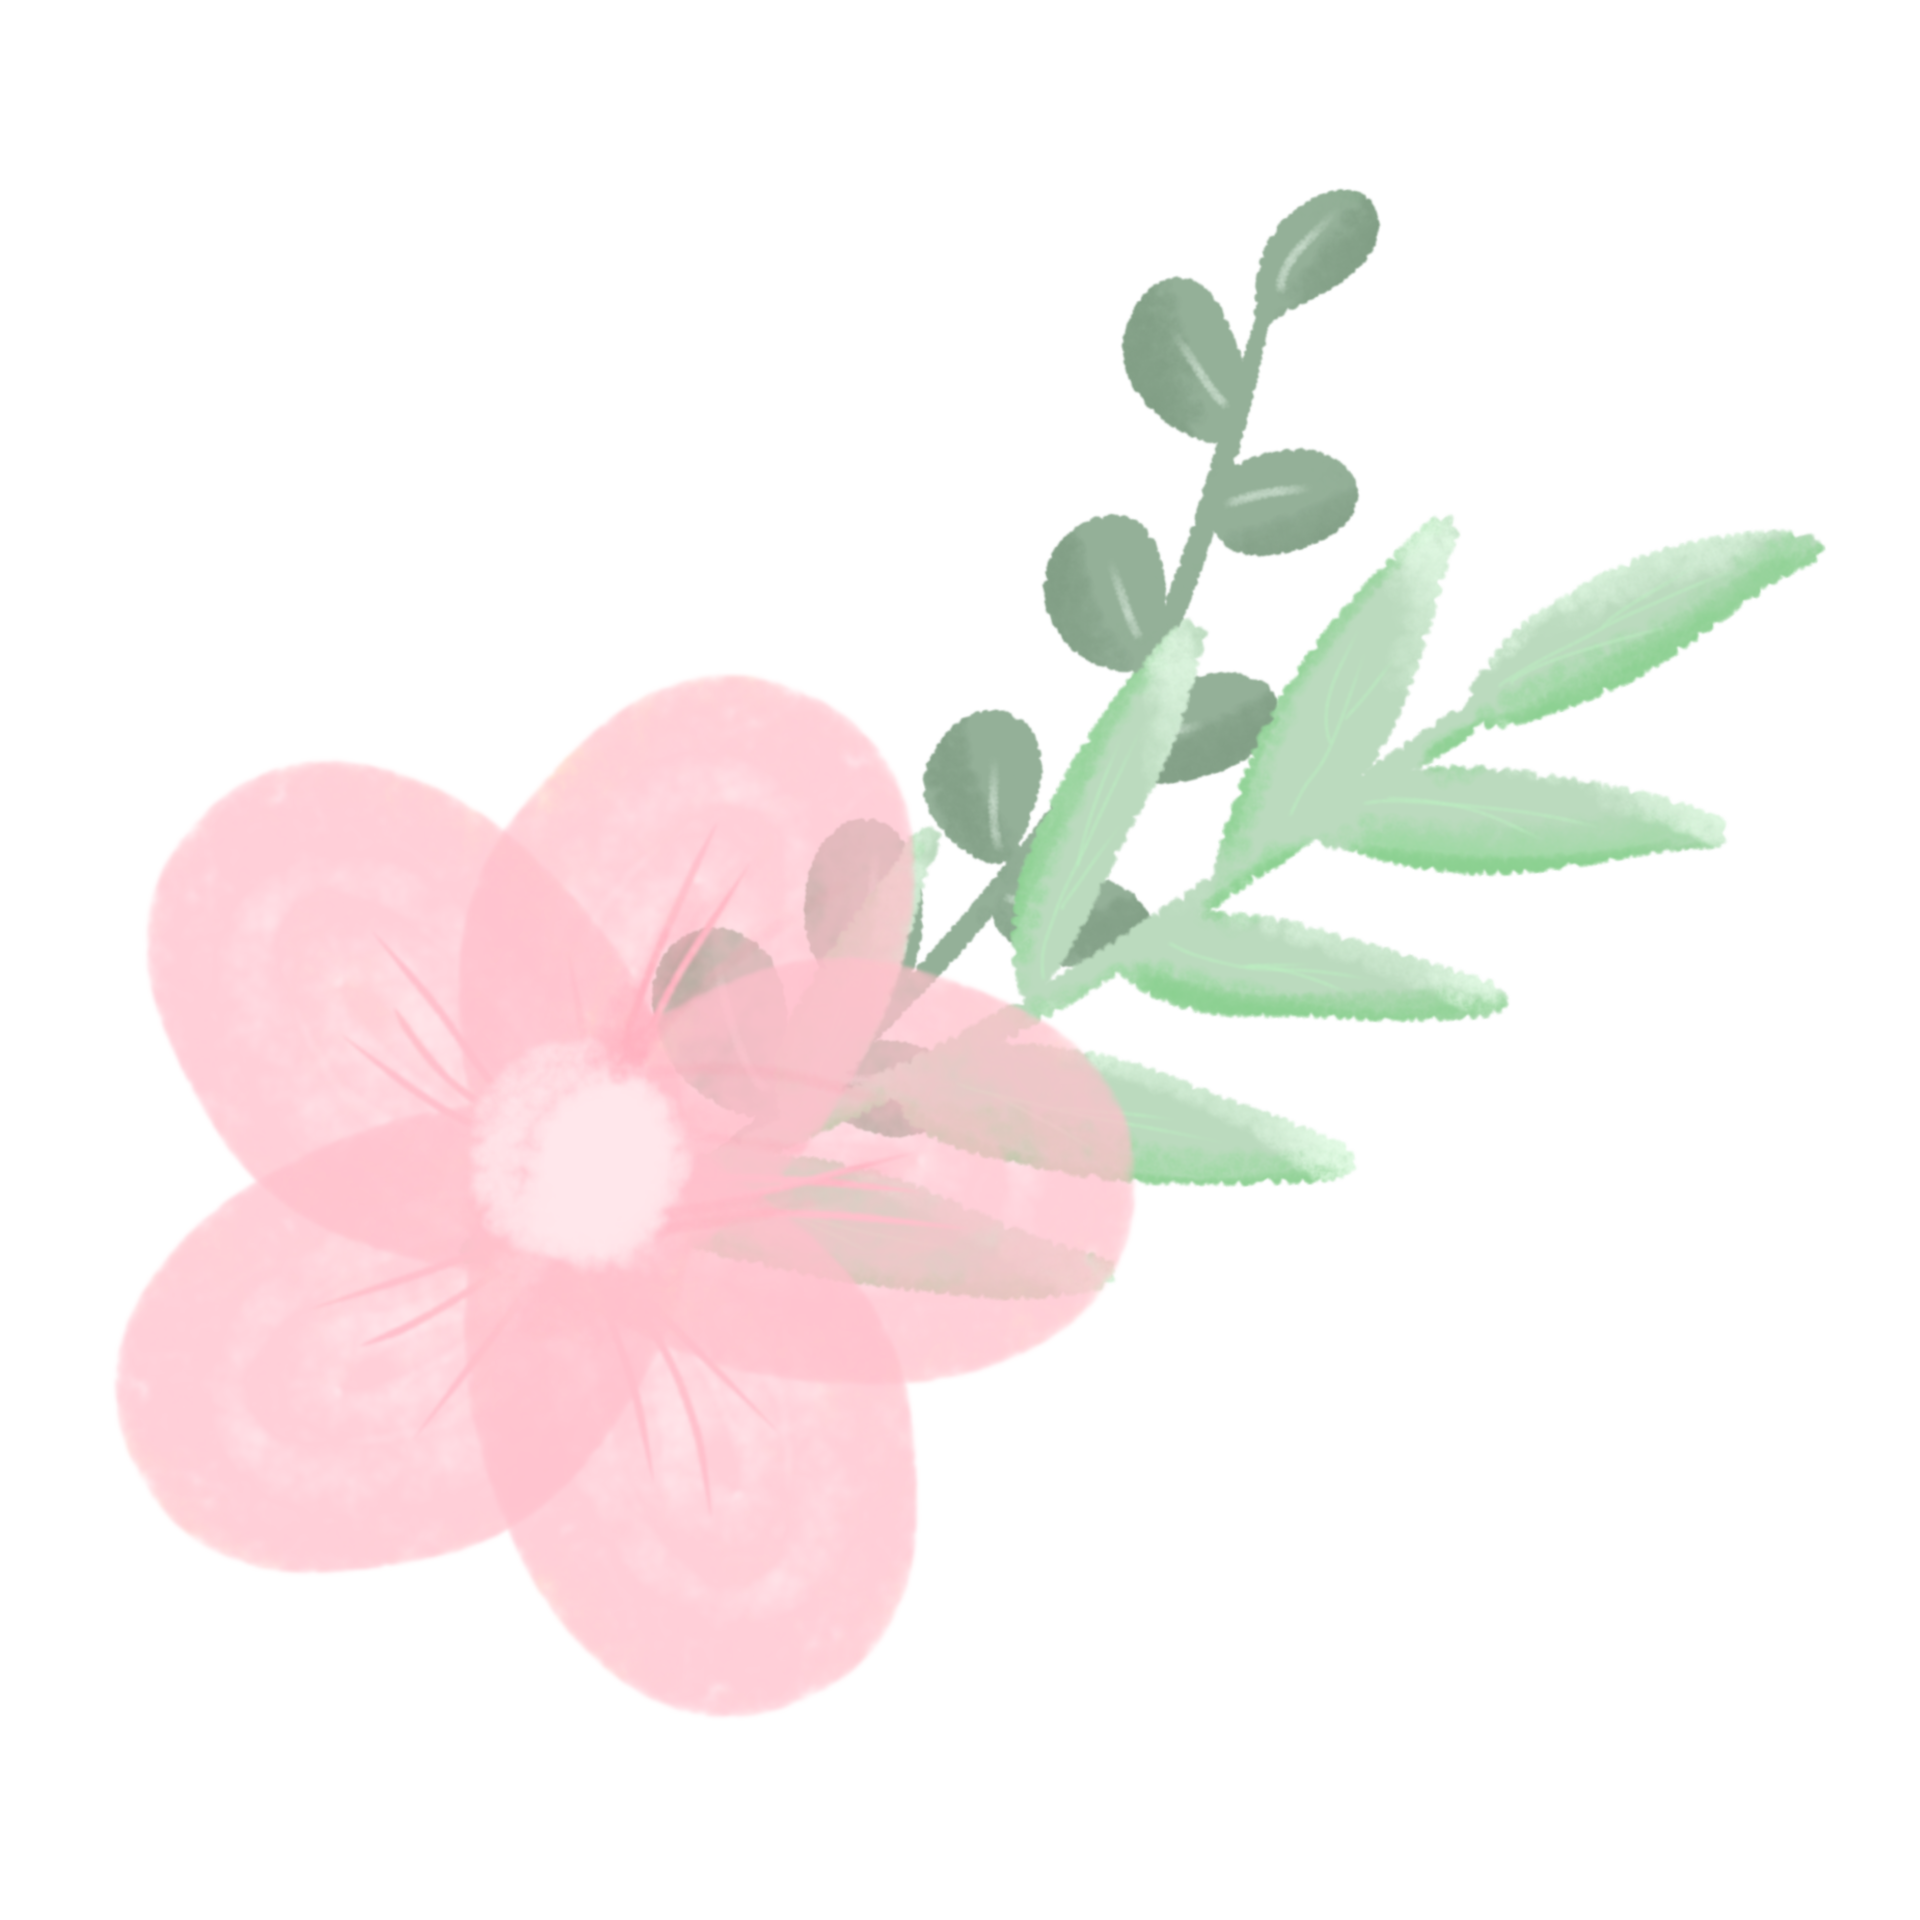 Flowers aesthetic png - Download Free Png Images